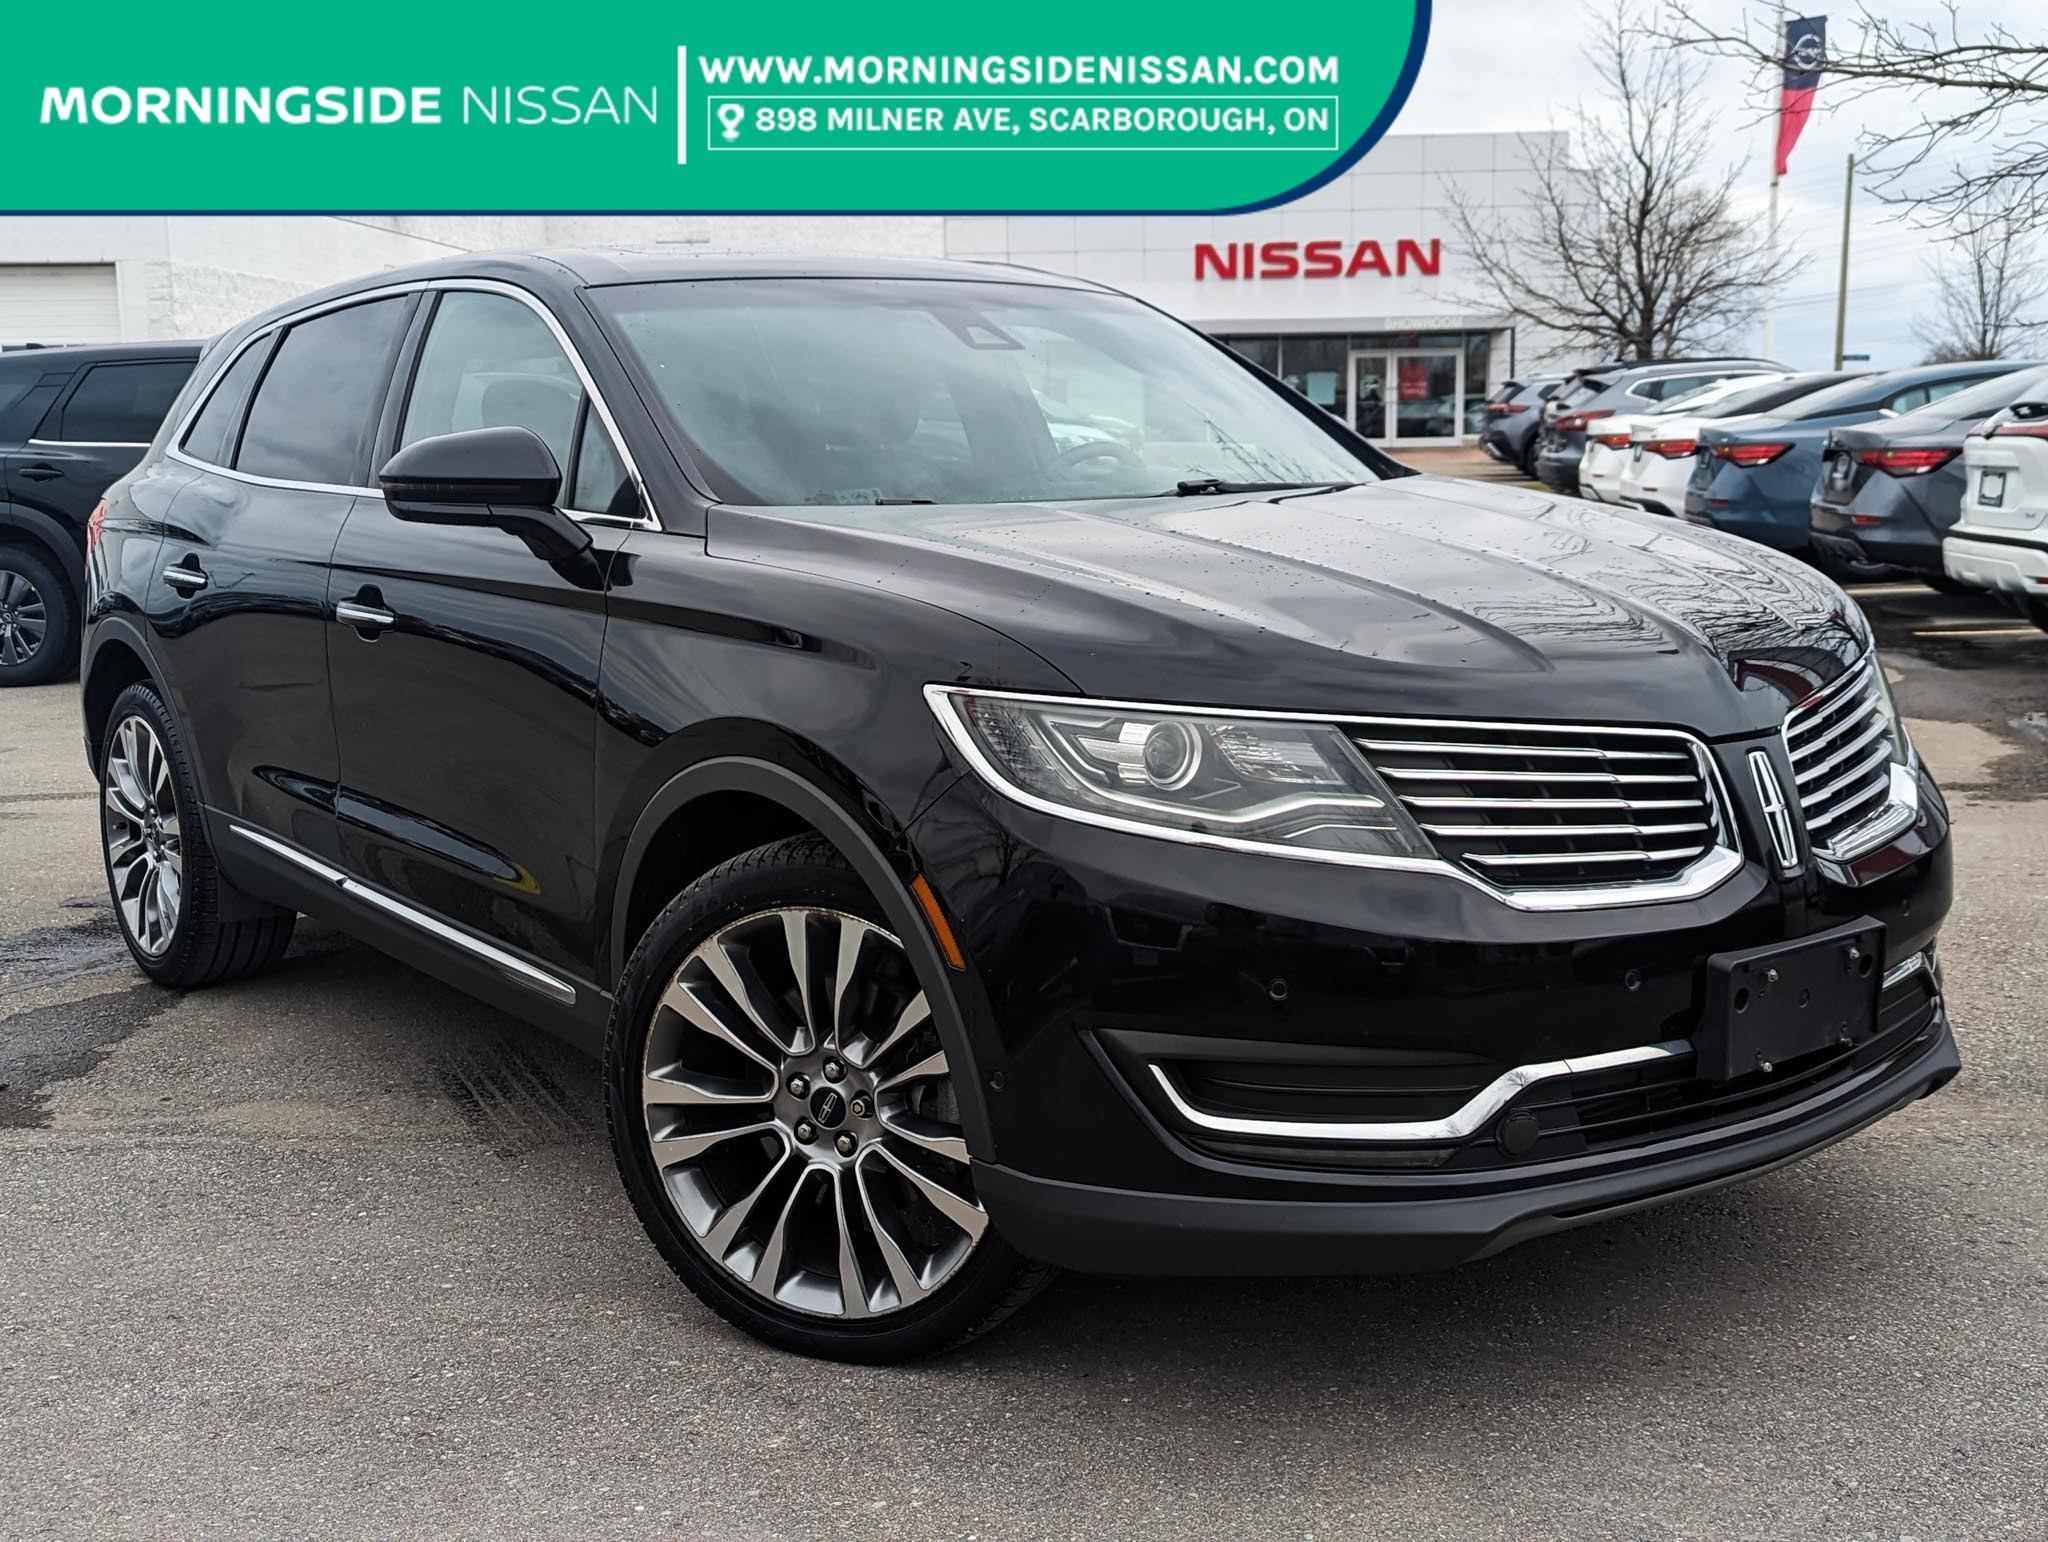 2017 Lincoln MKX RESERVE NO ACCIDENTS 6 CYL LOADED